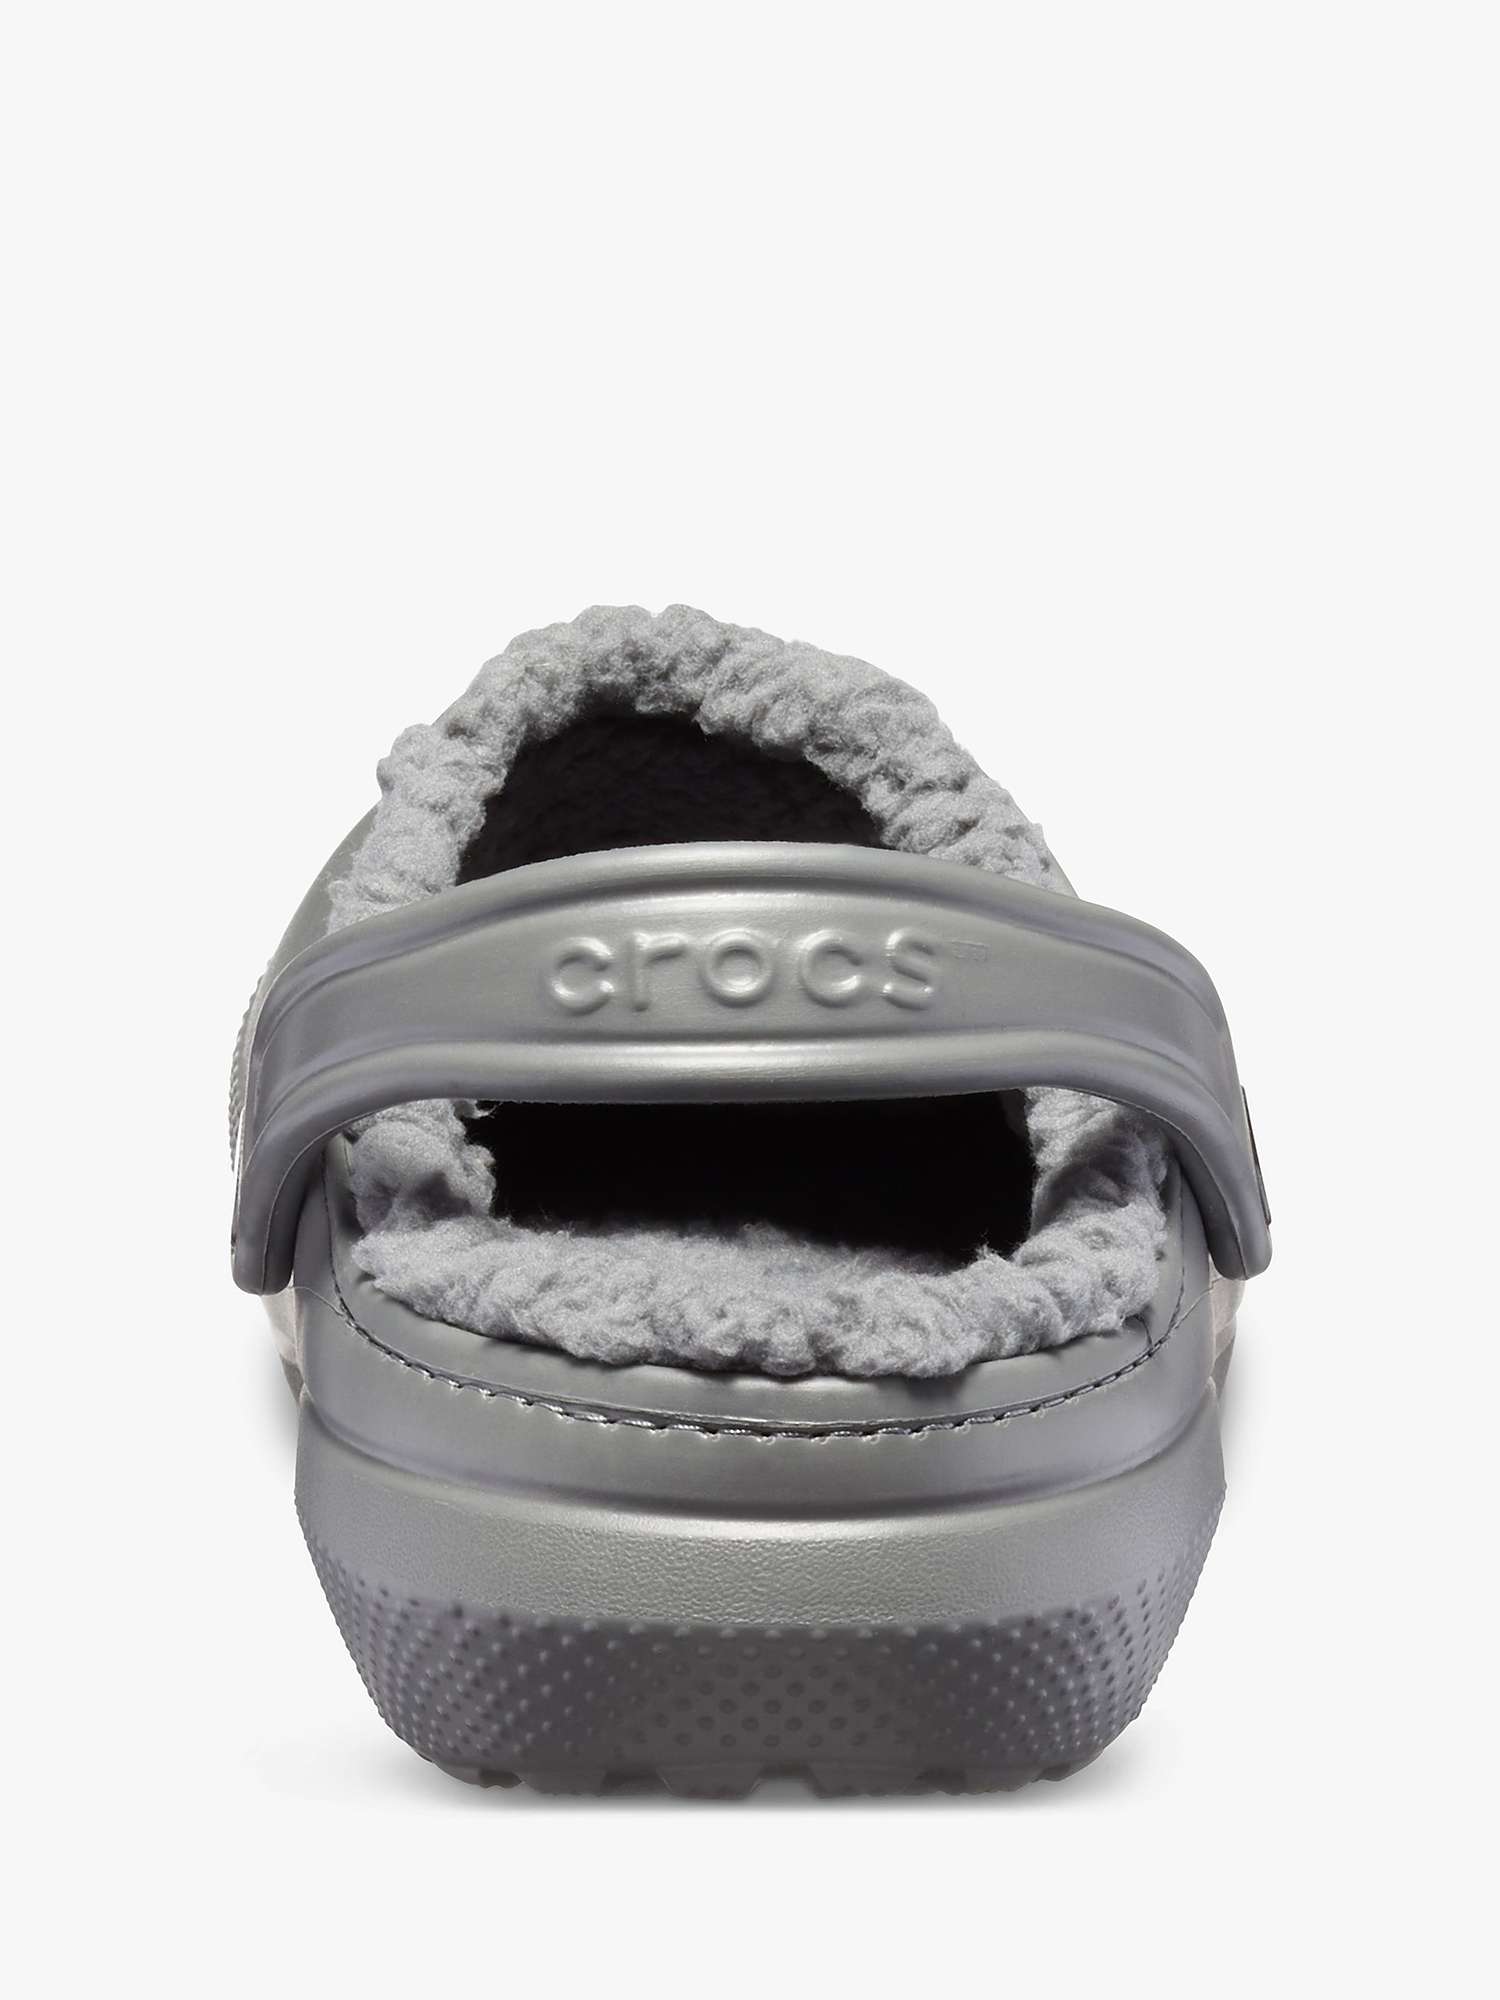 Buy Crocs Classic Lined Clogs Online at johnlewis.com